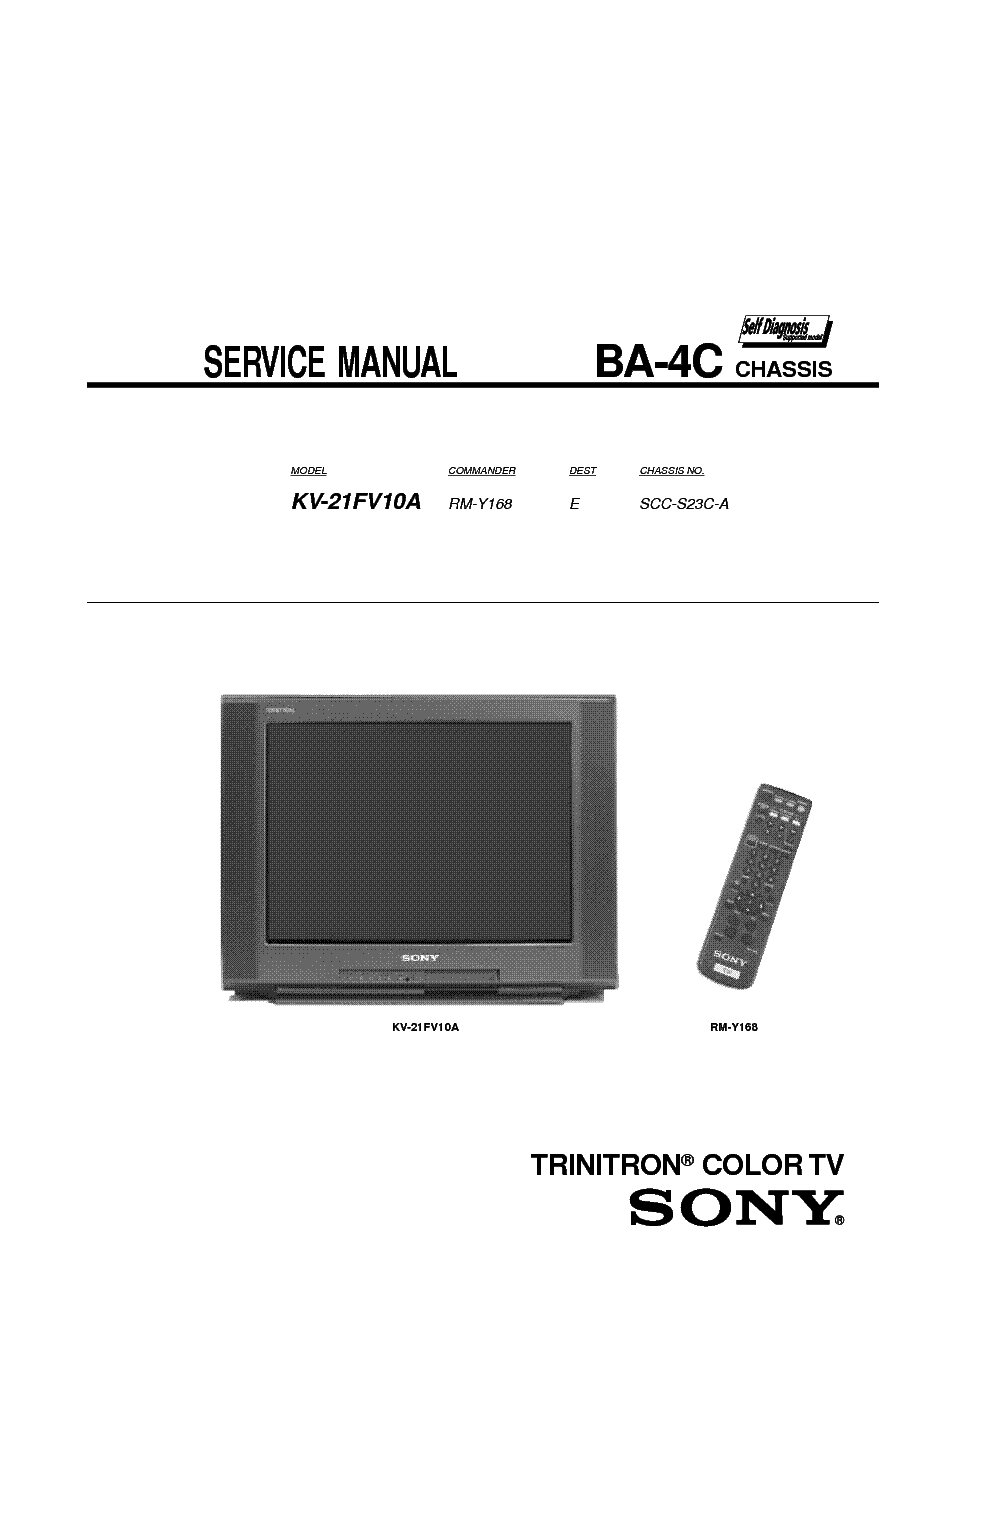 SONY KV21FV10A CHASSIS BA4C service manual (1st page)